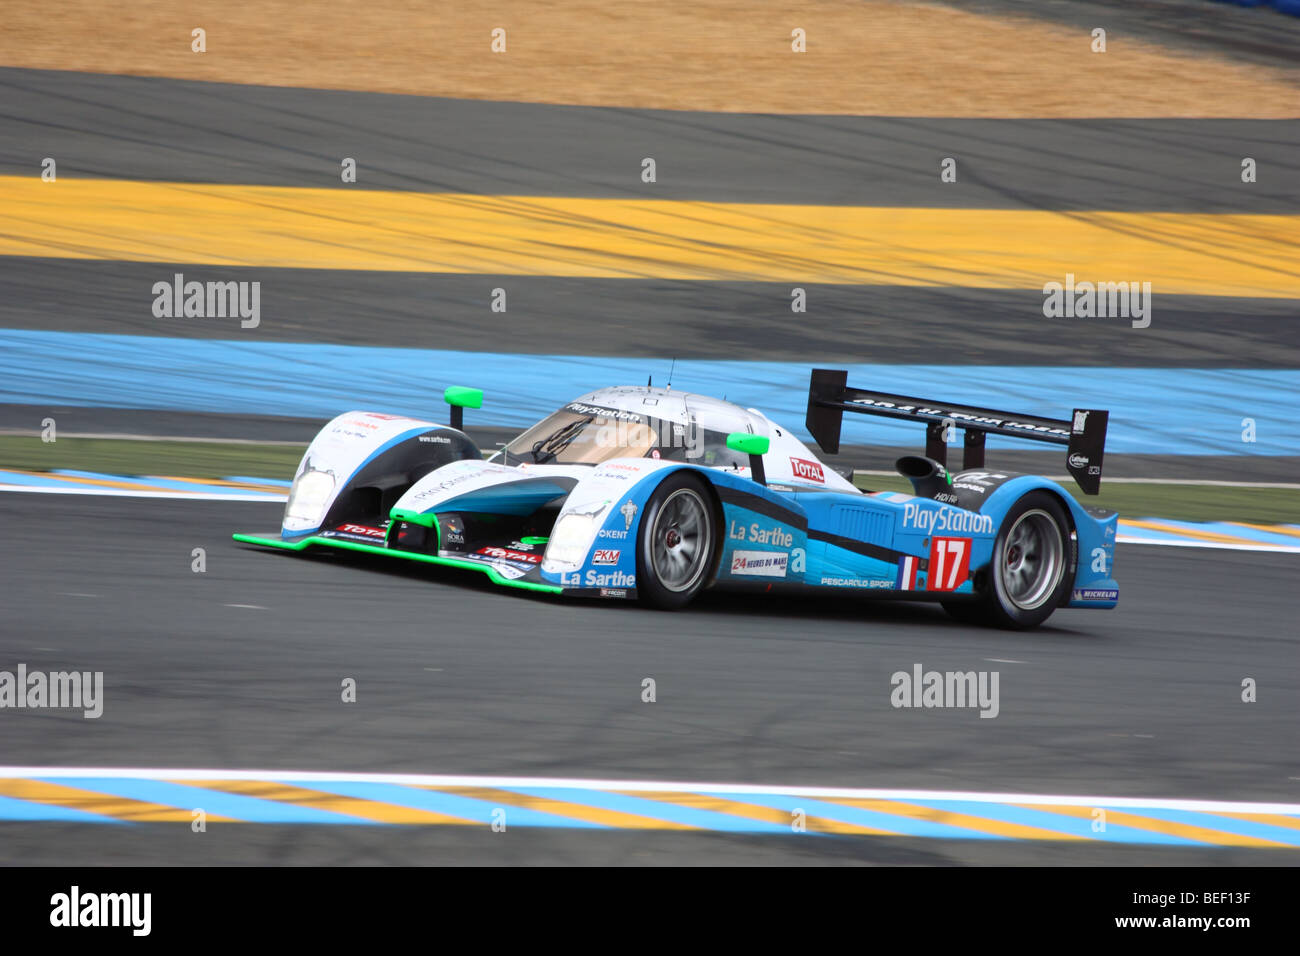 24 hours of Le Mans 2009 - Peugeot 908 HDI N°17 Stock Photo